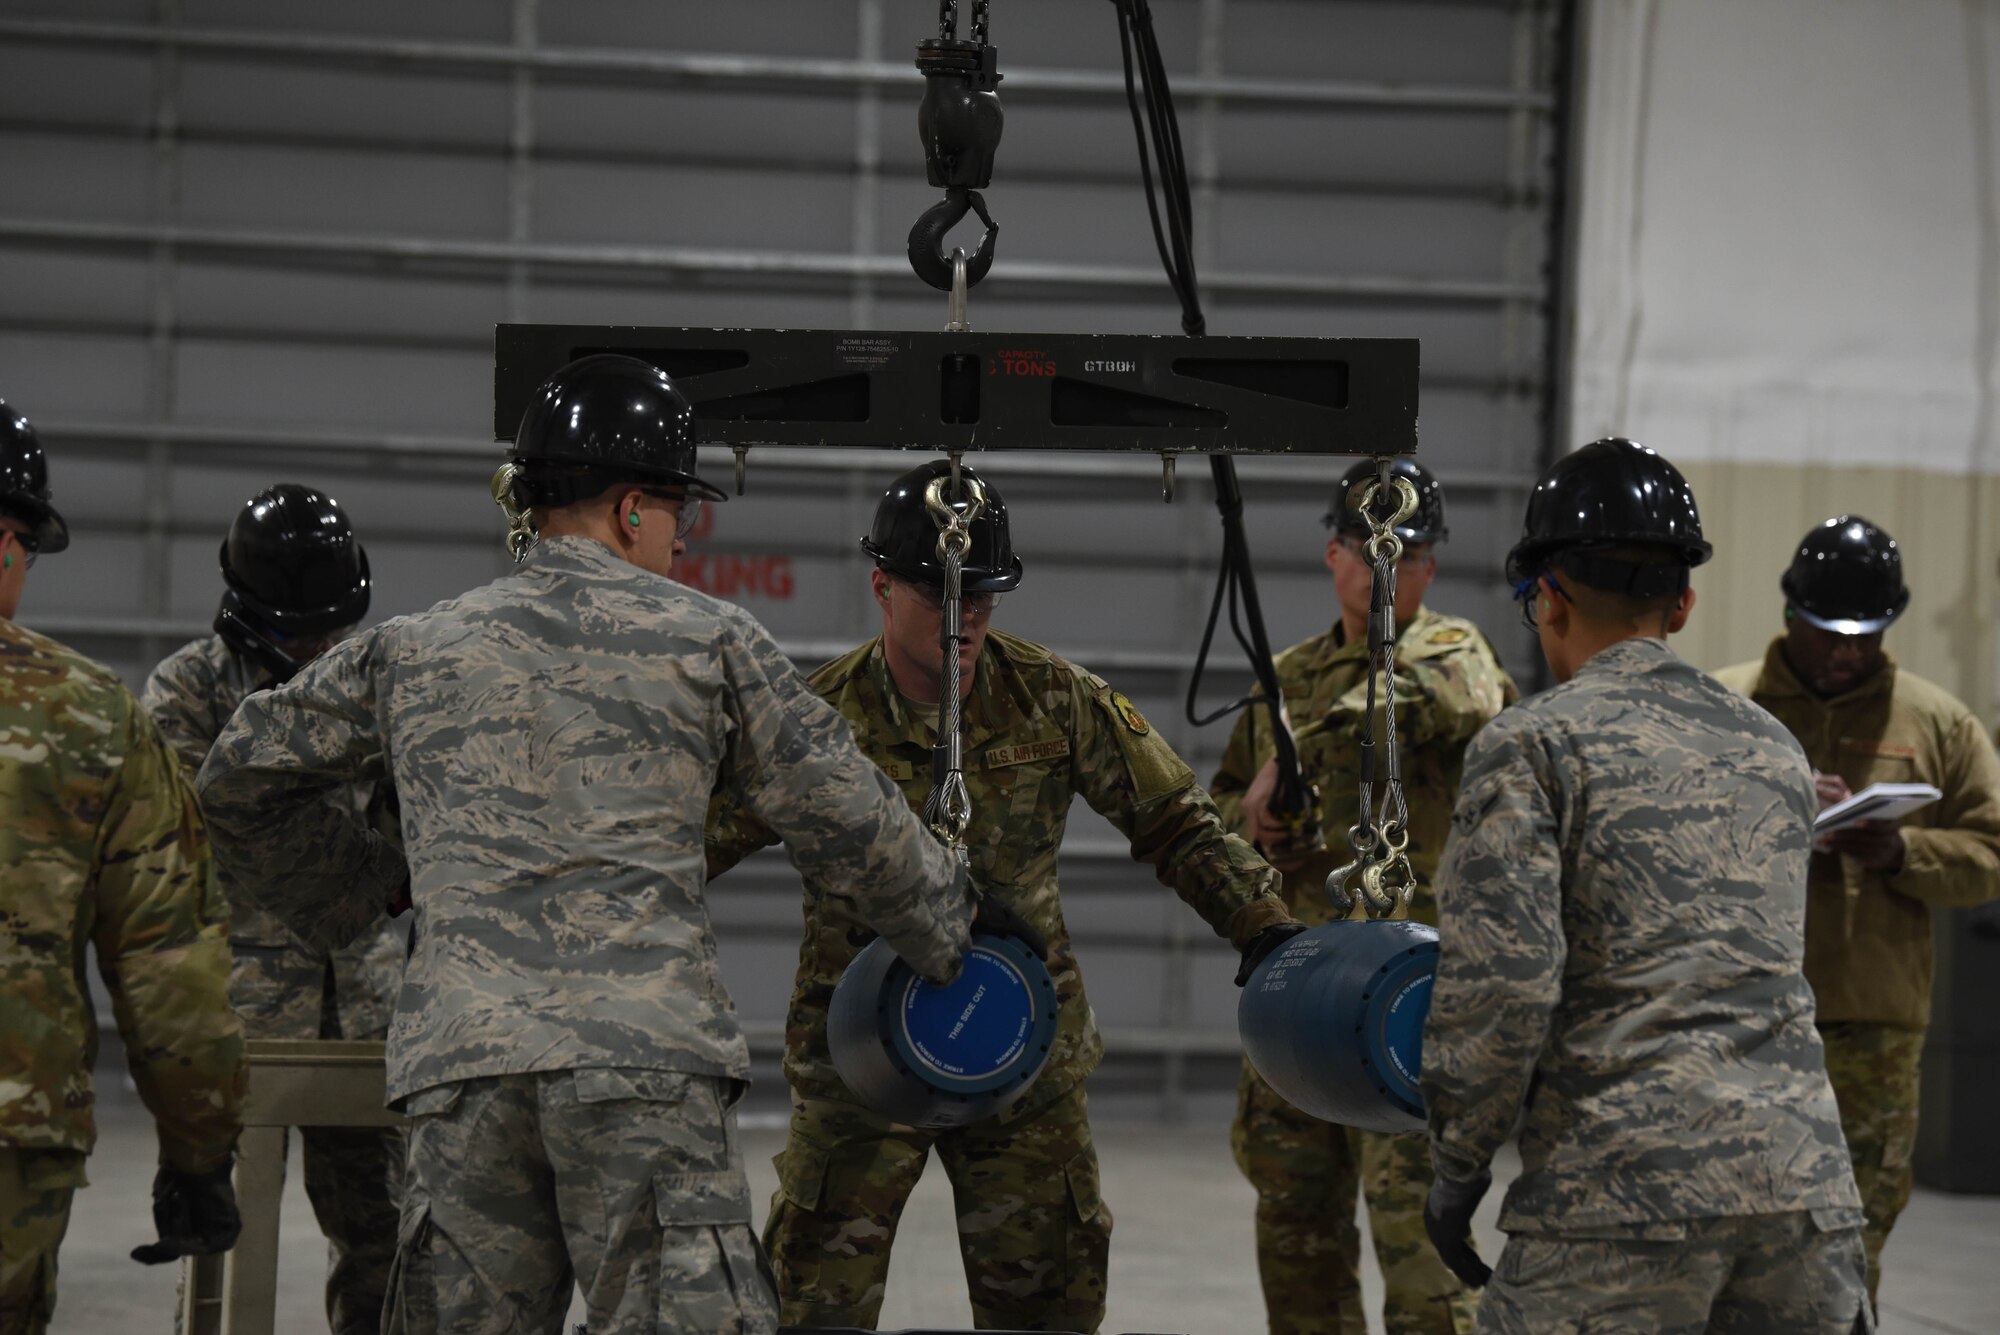 A team of Airmen work together to bring three small-diameter bombs onto a conveyer during the qualifying round of the second annual Air Force Combat Operations Competition on Ellsworth Air Force Base, S.D., Feb. 5, 2019. The competition is Air Force-wide and is used to determine the best of the best in munitions operations. (U.S. Air Force photo by Airman John Ennis)